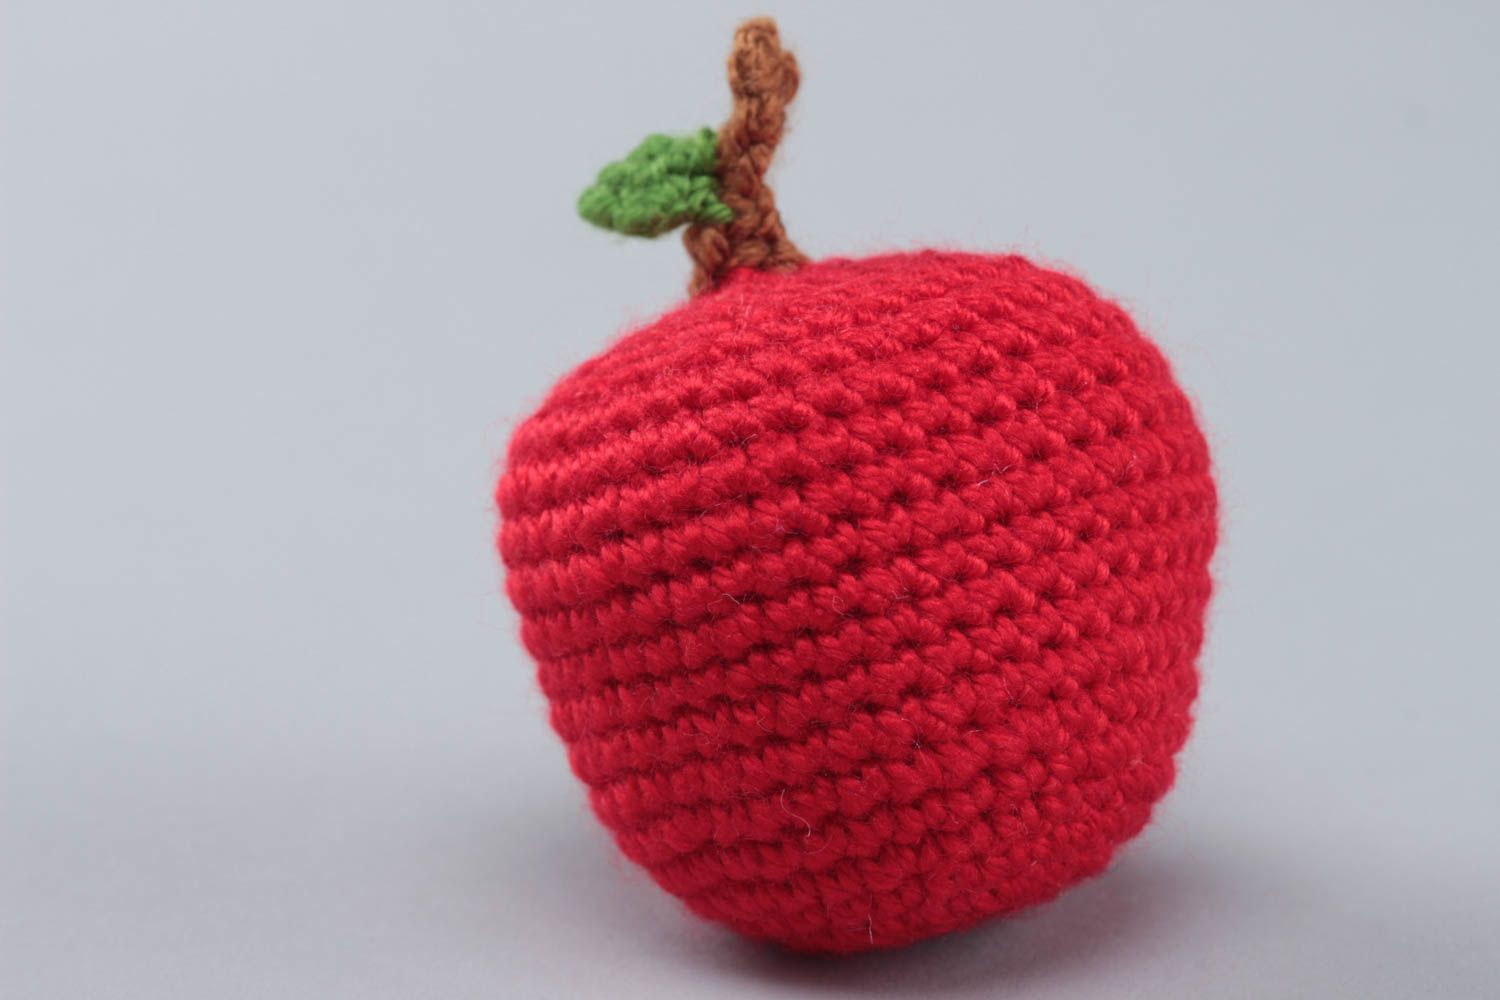 Handmade small crochet soft toy red apple for kids and interior decoration photo 3